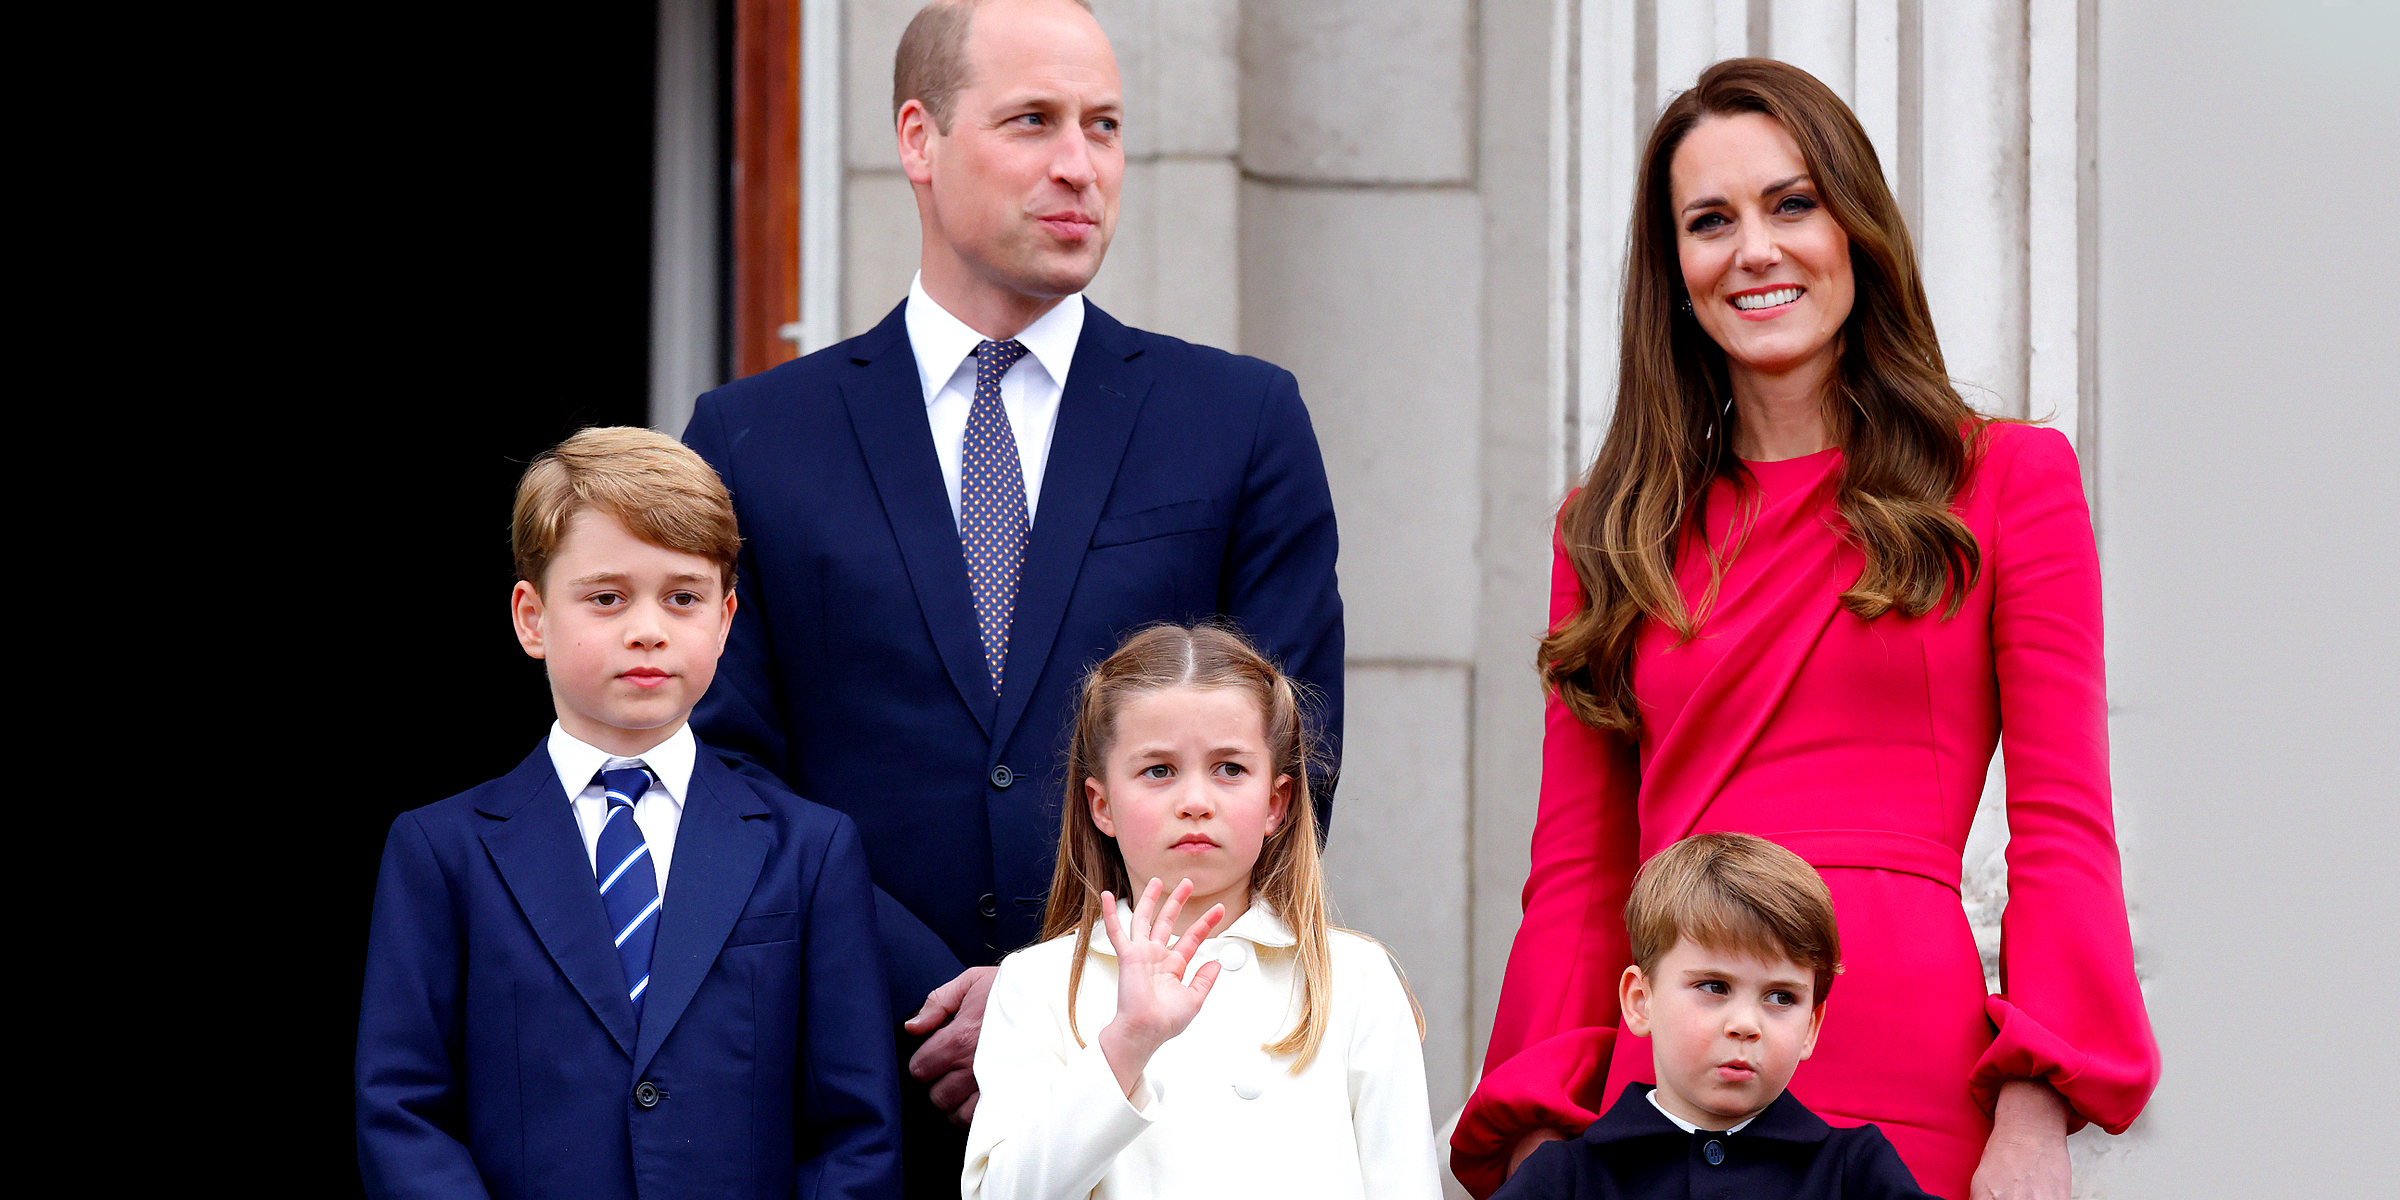 Prince George, Prince William, Princess Charlotte, Prince Louis and Princess Catherine | Source: Getty Images